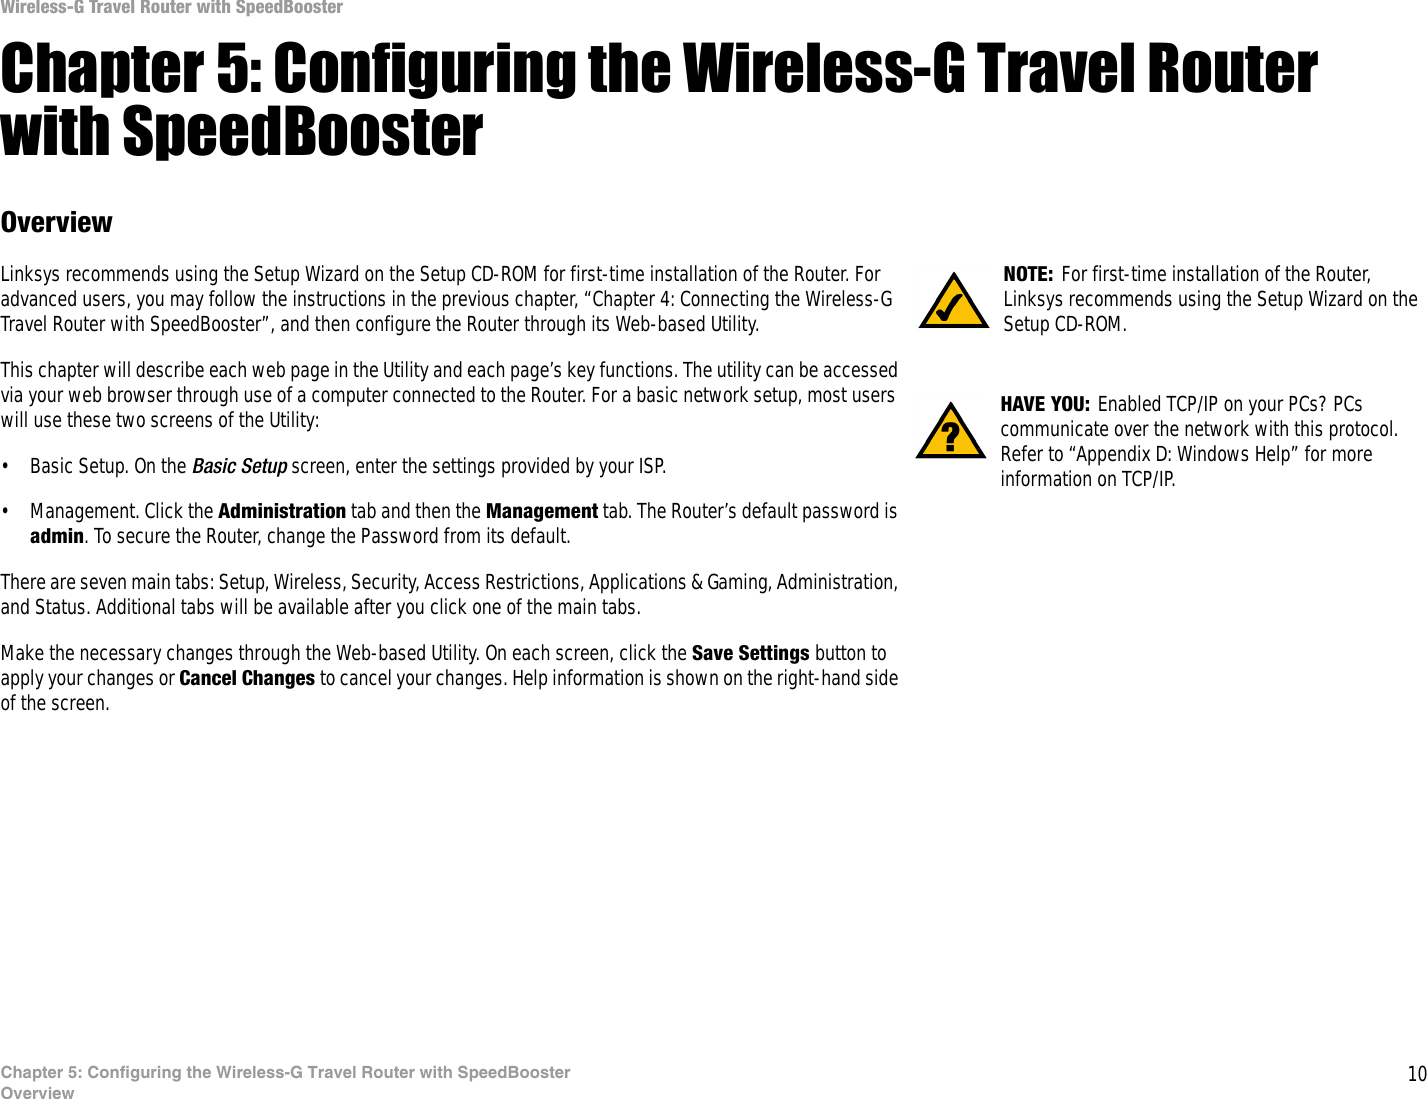 10Chapter 5: Configuring the Wireless-G Travel Router with SpeedBoosterOverviewWireless-G Travel Router with SpeedBoosterChapter 5: Configuring the Wireless-G Travel Router with SpeedBoosterOverviewLinksys recommends using the Setup Wizard on the Setup CD-ROM for first-time installation of the Router. For advanced users, you may follow the instructions in the previous chapter, “Chapter 4: Connecting the Wireless-G Travel Router with SpeedBooster”, and then configure the Router through its Web-based Utility.This chapter will describe each web page in the Utility and each page’s key functions. The utility can be accessed via your web browser through use of a computer connected to the Router. For a basic network setup, most users will use these two screens of the Utility:• Basic Setup. On the Basic Setup screen, enter the settings provided by your ISP.• Management. Click the Administration tab and then the Management tab. The Router’s default password is admin. To secure the Router, change the Password from its default.There are seven main tabs: Setup, Wireless, Security, Access Restrictions, Applications &amp; Gaming, Administration, and Status. Additional tabs will be available after you click one of the main tabs.Make the necessary changes through the Web-based Utility. On each screen, click the Save Settings button to apply your changes or Cancel Changes to cancel your changes. Help information is shown on the right-hand side of the screen. HAVE YOU: Enabled TCP/IP on your PCs? PCs communicate over the network with this protocol. Refer to “Appendix D: Windows Help” for more information on TCP/IP.NOTE: For first-time installation of the Router, Linksys recommends using the Setup Wizard on the Setup CD-ROM.